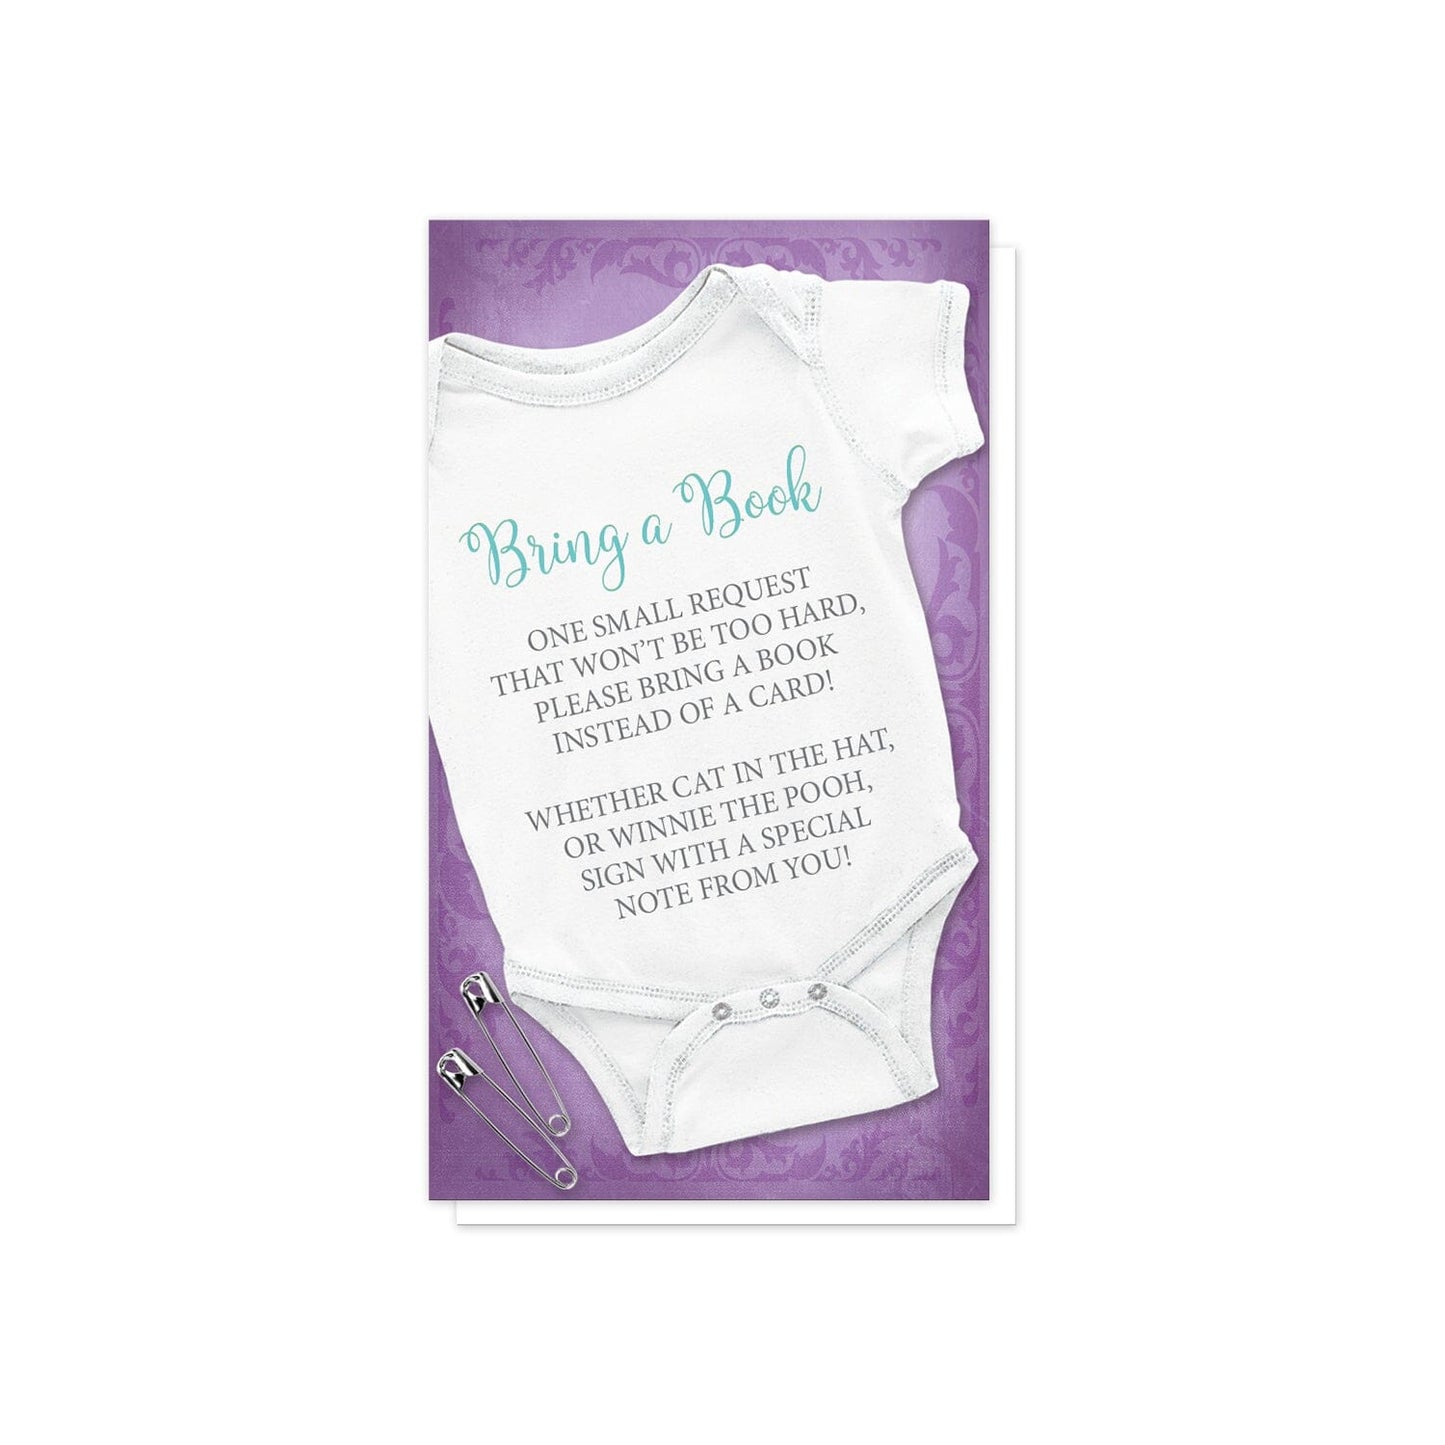 Baby Bodysuit and Safety Pins Purple Bring a Book Cards at Artistically Invited. Uniquely designed baby bodysuit and safety pins purple bring a book cards with an illustration of a white infant bodysuit and two safety pin over a purple flourish background. Your book request details are printed in teal and gray on an angle over the white baby bodysuit. 